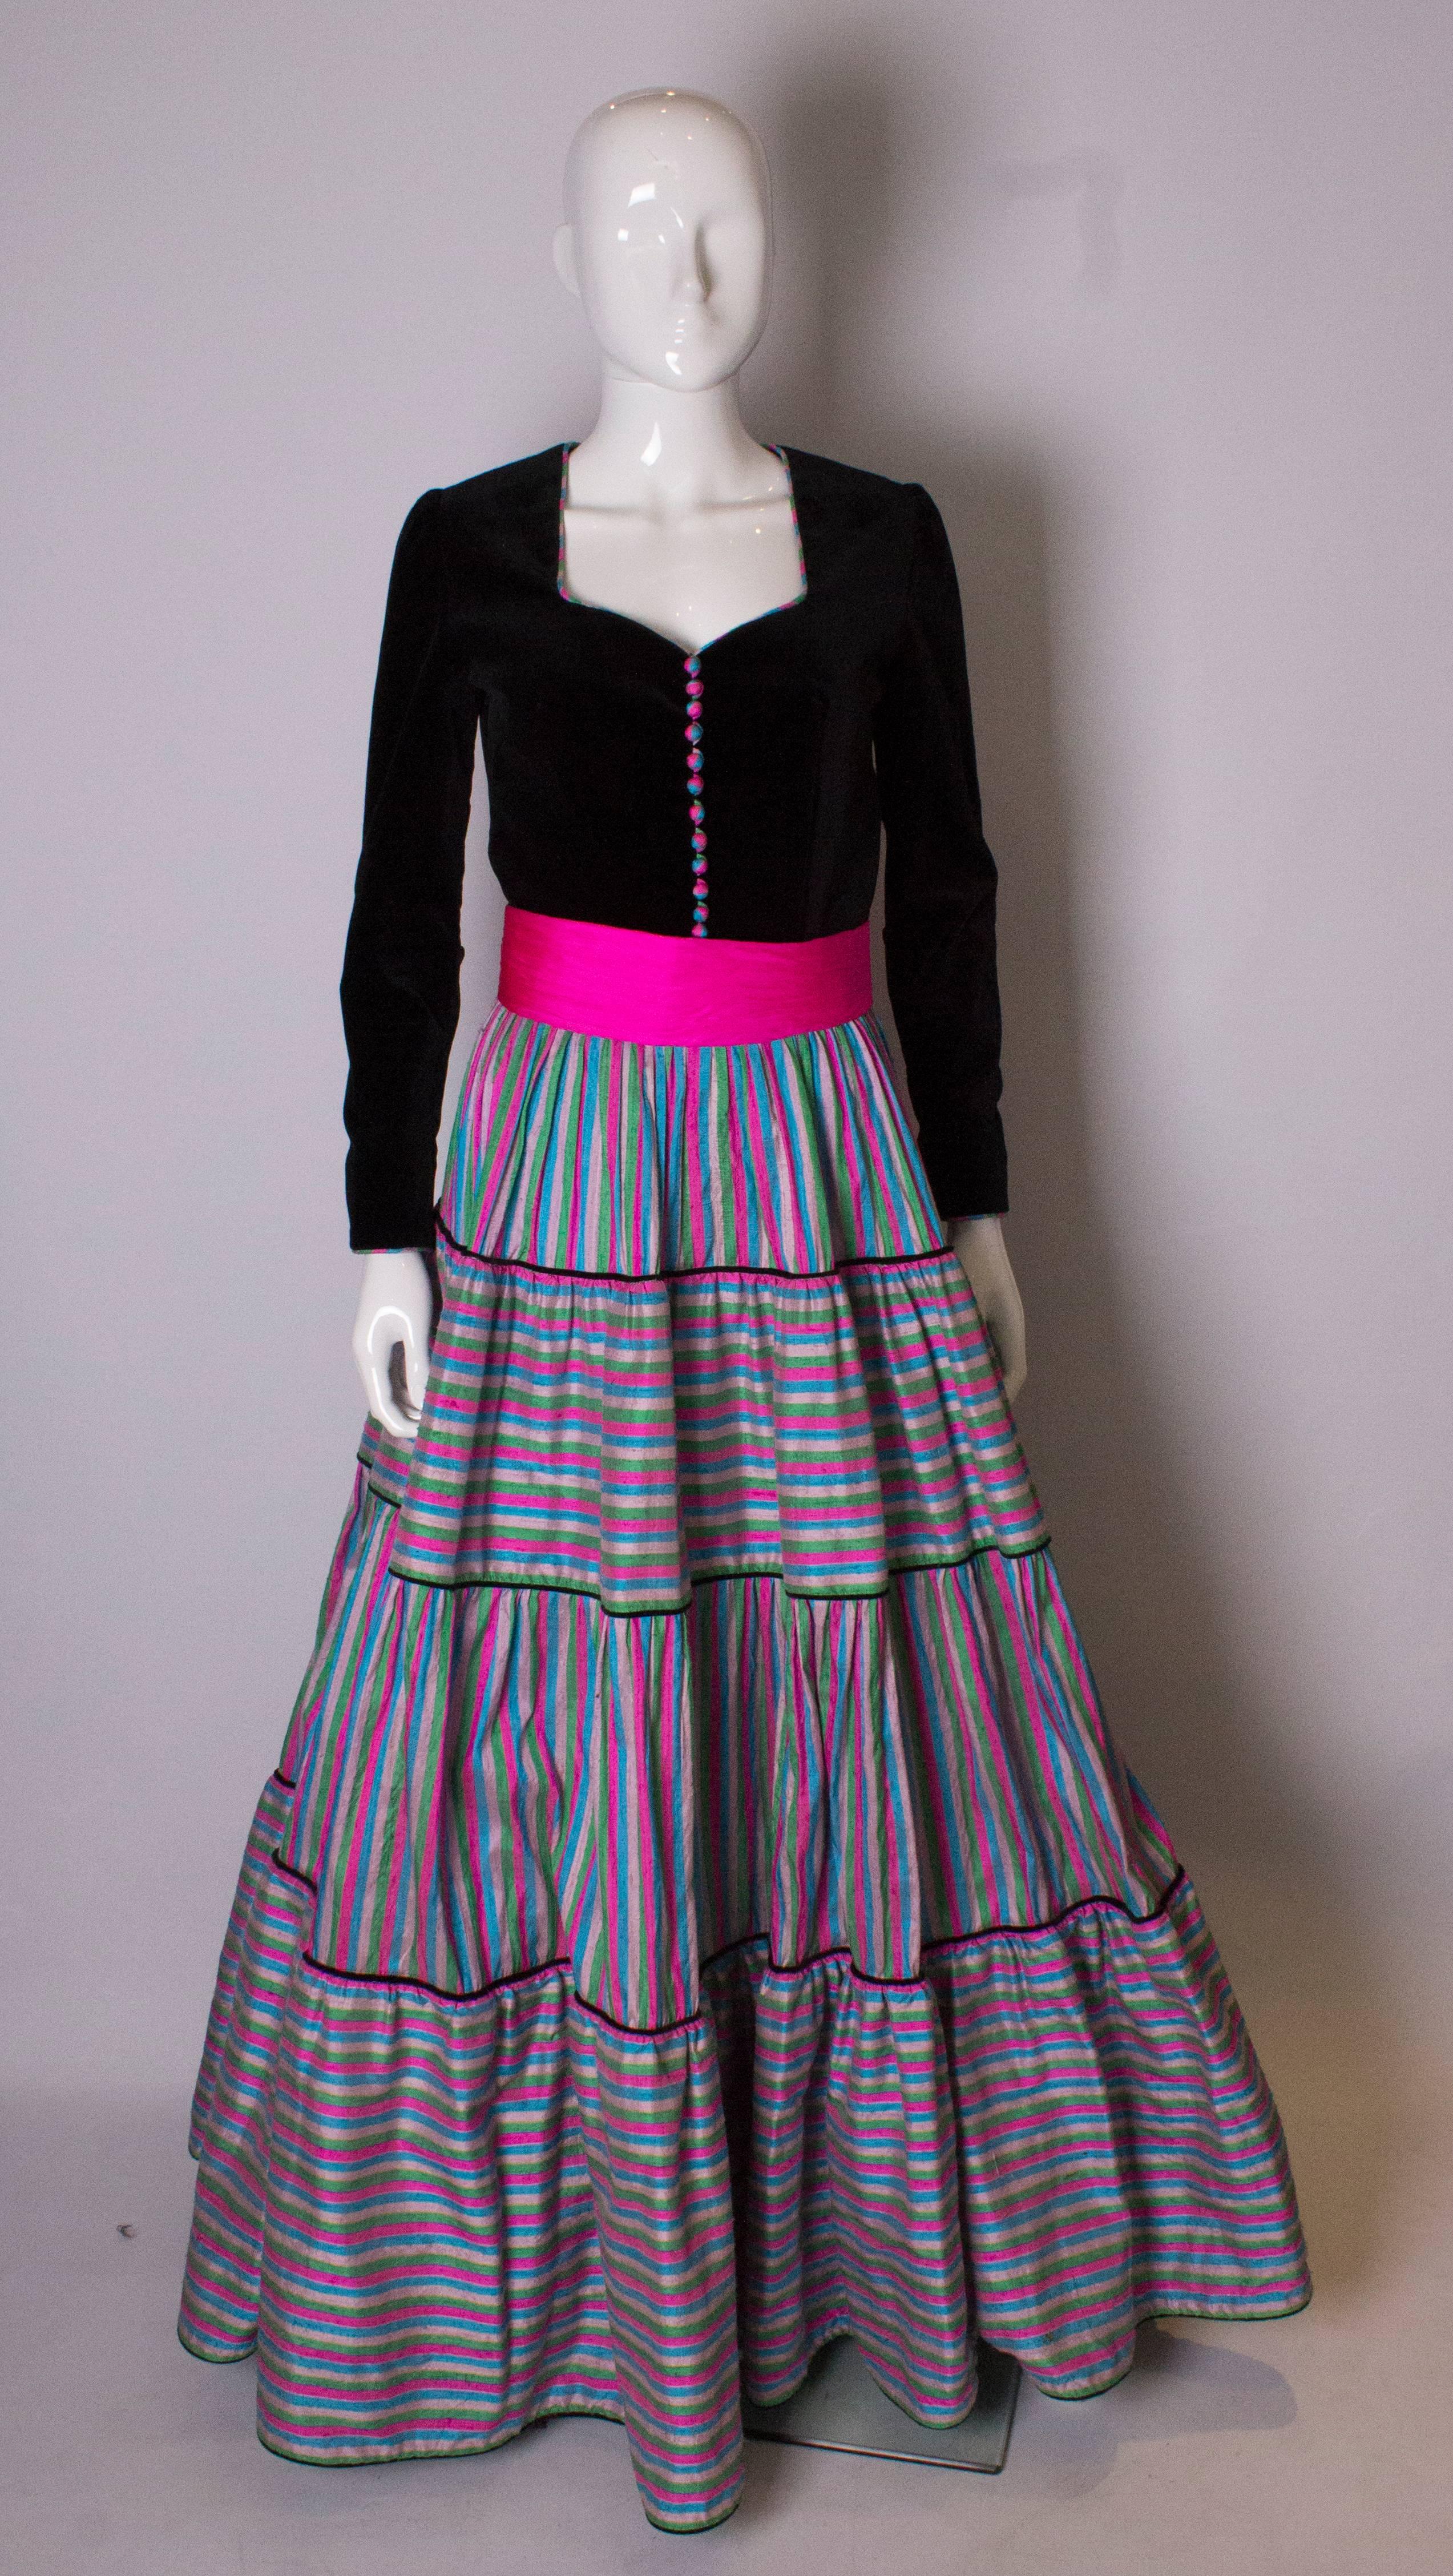 A great gown by Regamus London. The gown has a black velvet top half with a sweetheart neckline. It has a full skirt, with silk tiers of horizontal and vertical stripe silk. It has a net underskirt which is edged in coloured silk,and a central back